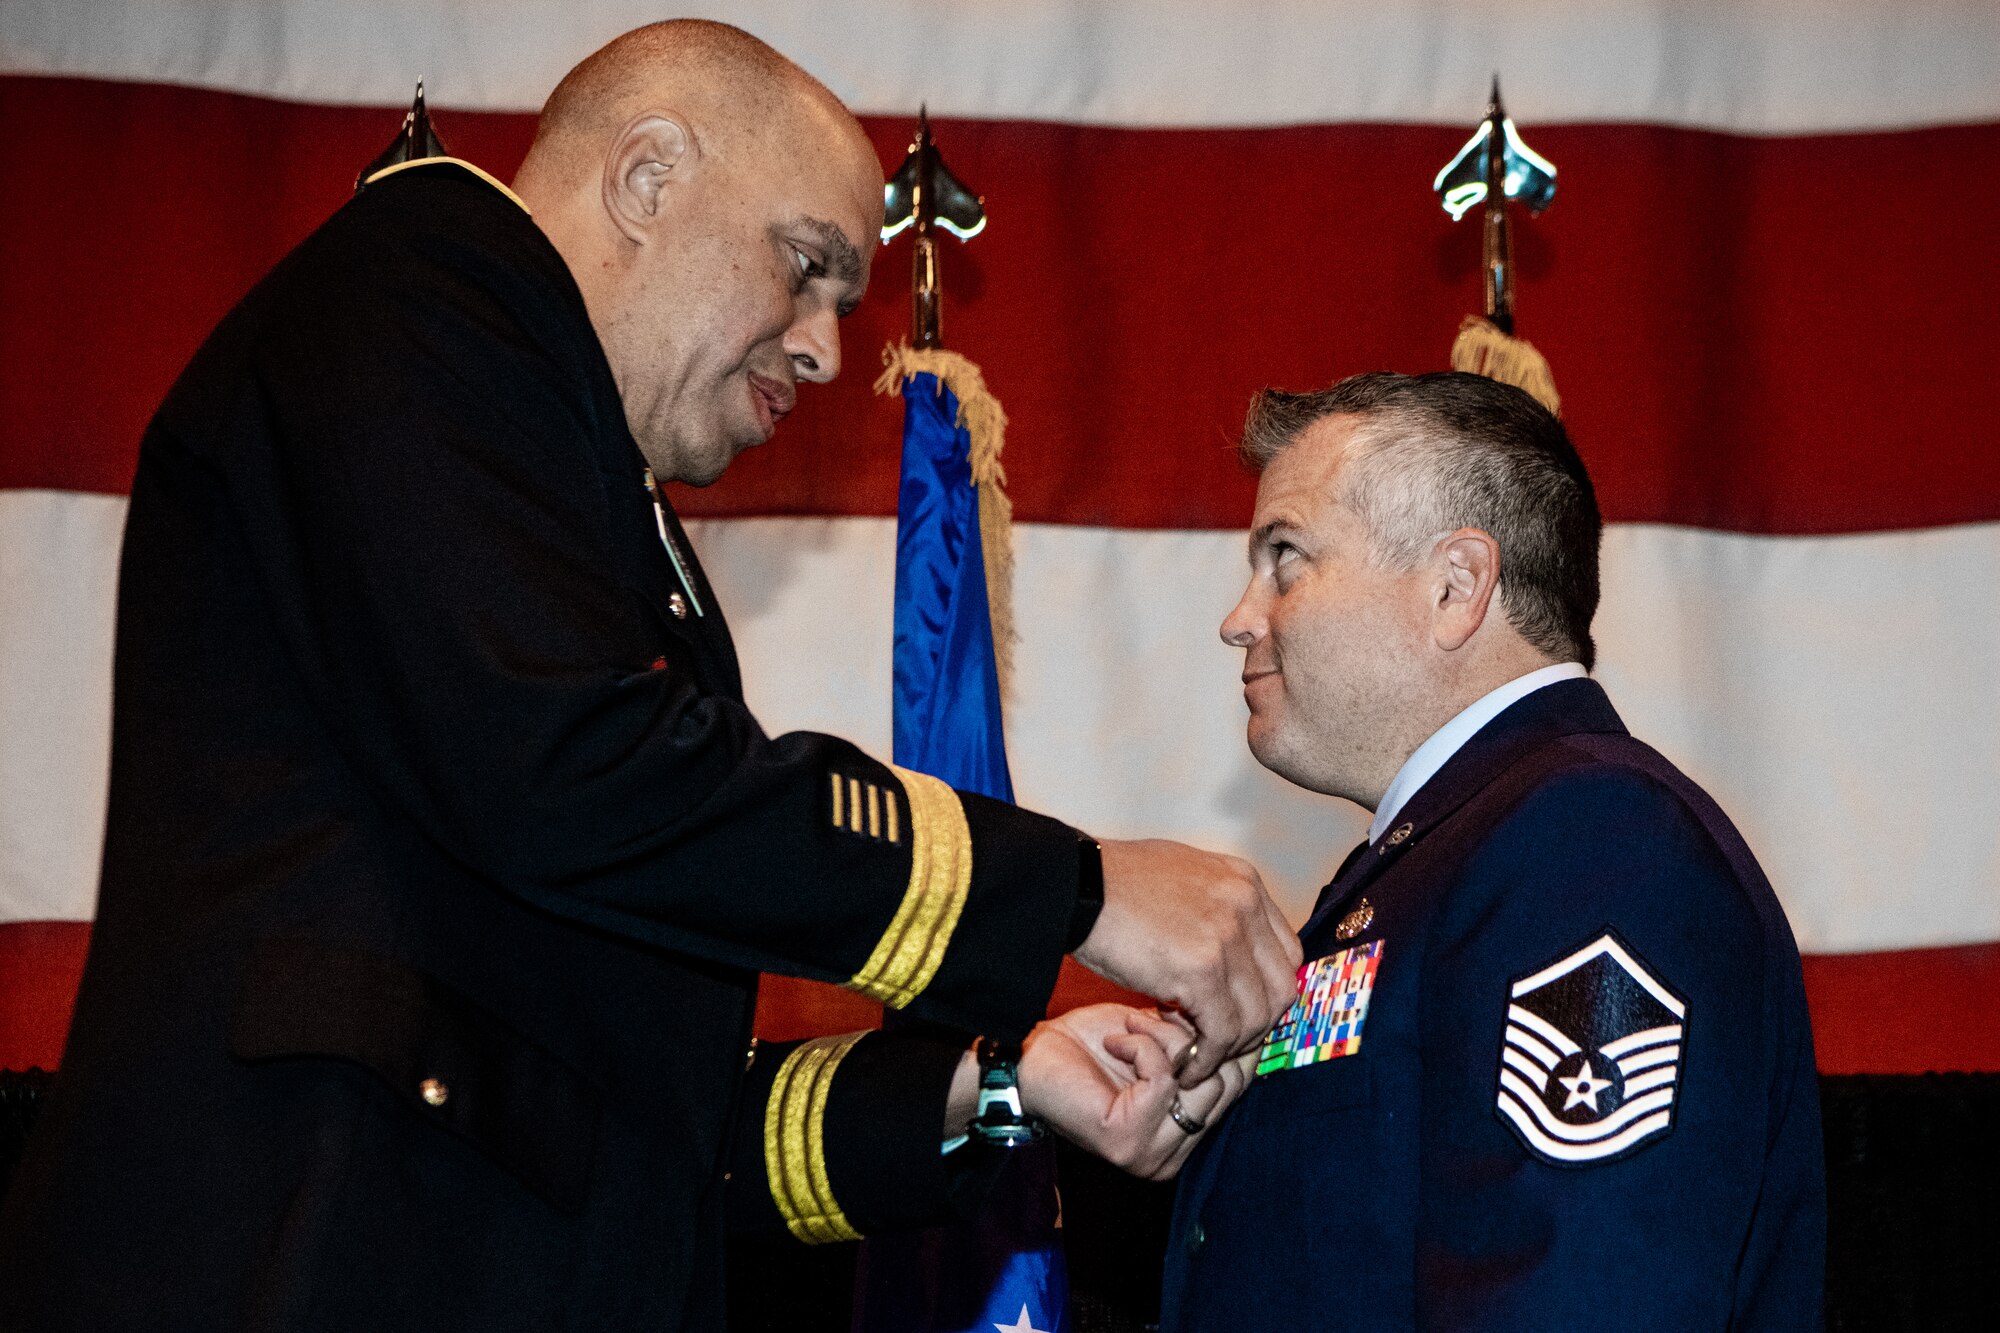 Maj. Gen. Michael C. Thompson, adjutant general for Oklahoma, presents Master Sgt. Bryan Whittle, assigned to the 205th Engineering and Installation Squadron, with the Airman’s Medal at an award ceremony at Will Rogers Air National Guard Base in Oklahoma City, Dec. 8, 2019. The Airman’s Medal is the highest noncombat award given in the Air Force and awarded to service members who distinguish themselves by a heroic act, usually at the voluntary risk of their own life.  (U.S. Air National Guard photo by Staff Sgt. Jordan Martin)